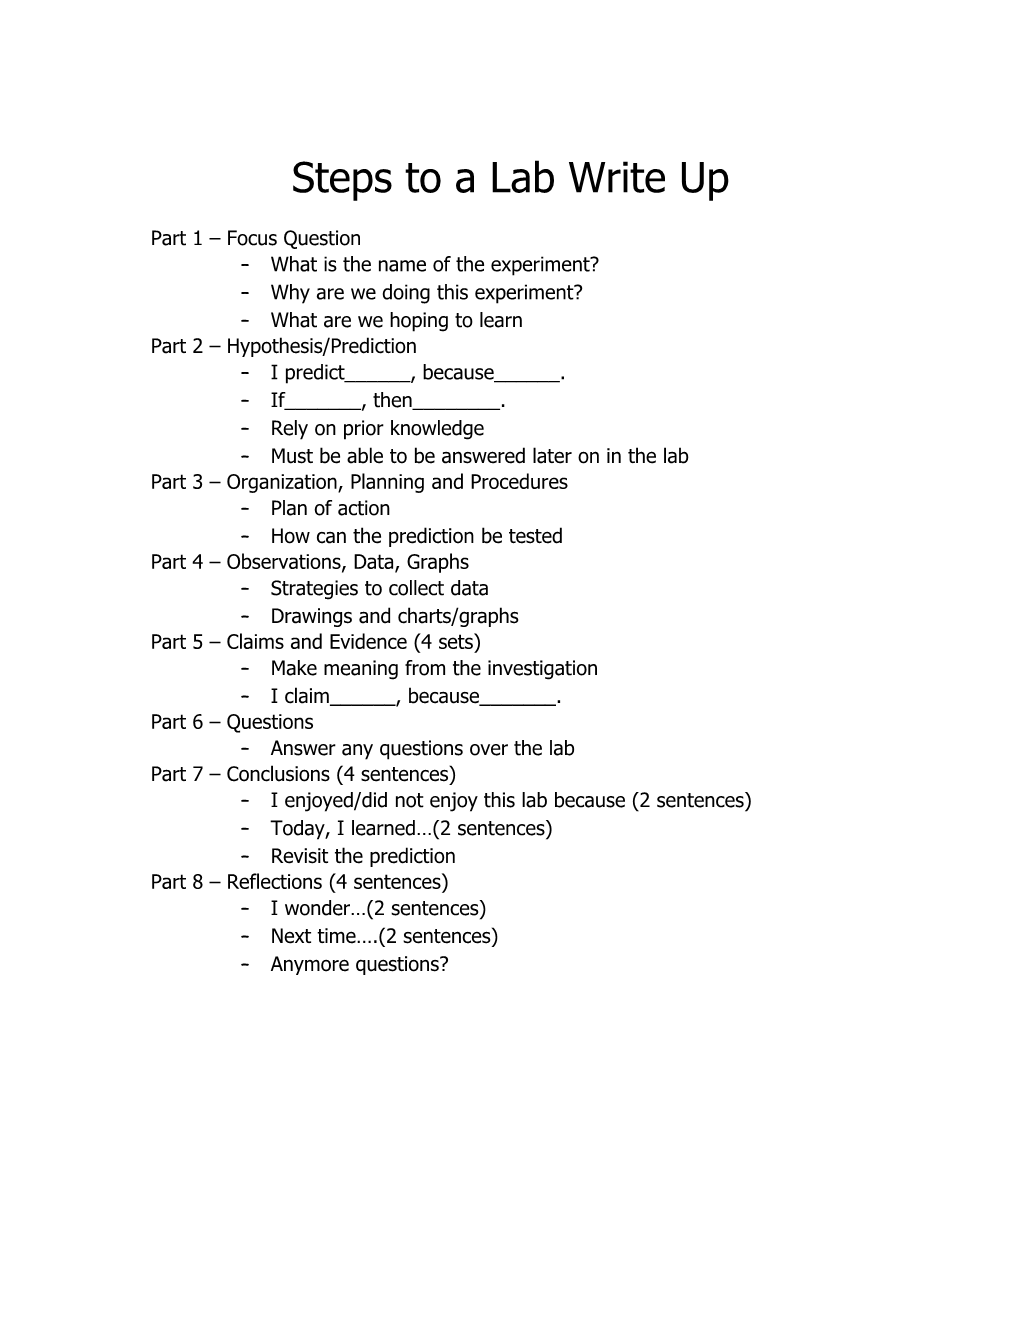 Seven Steps to a Lab Write Up